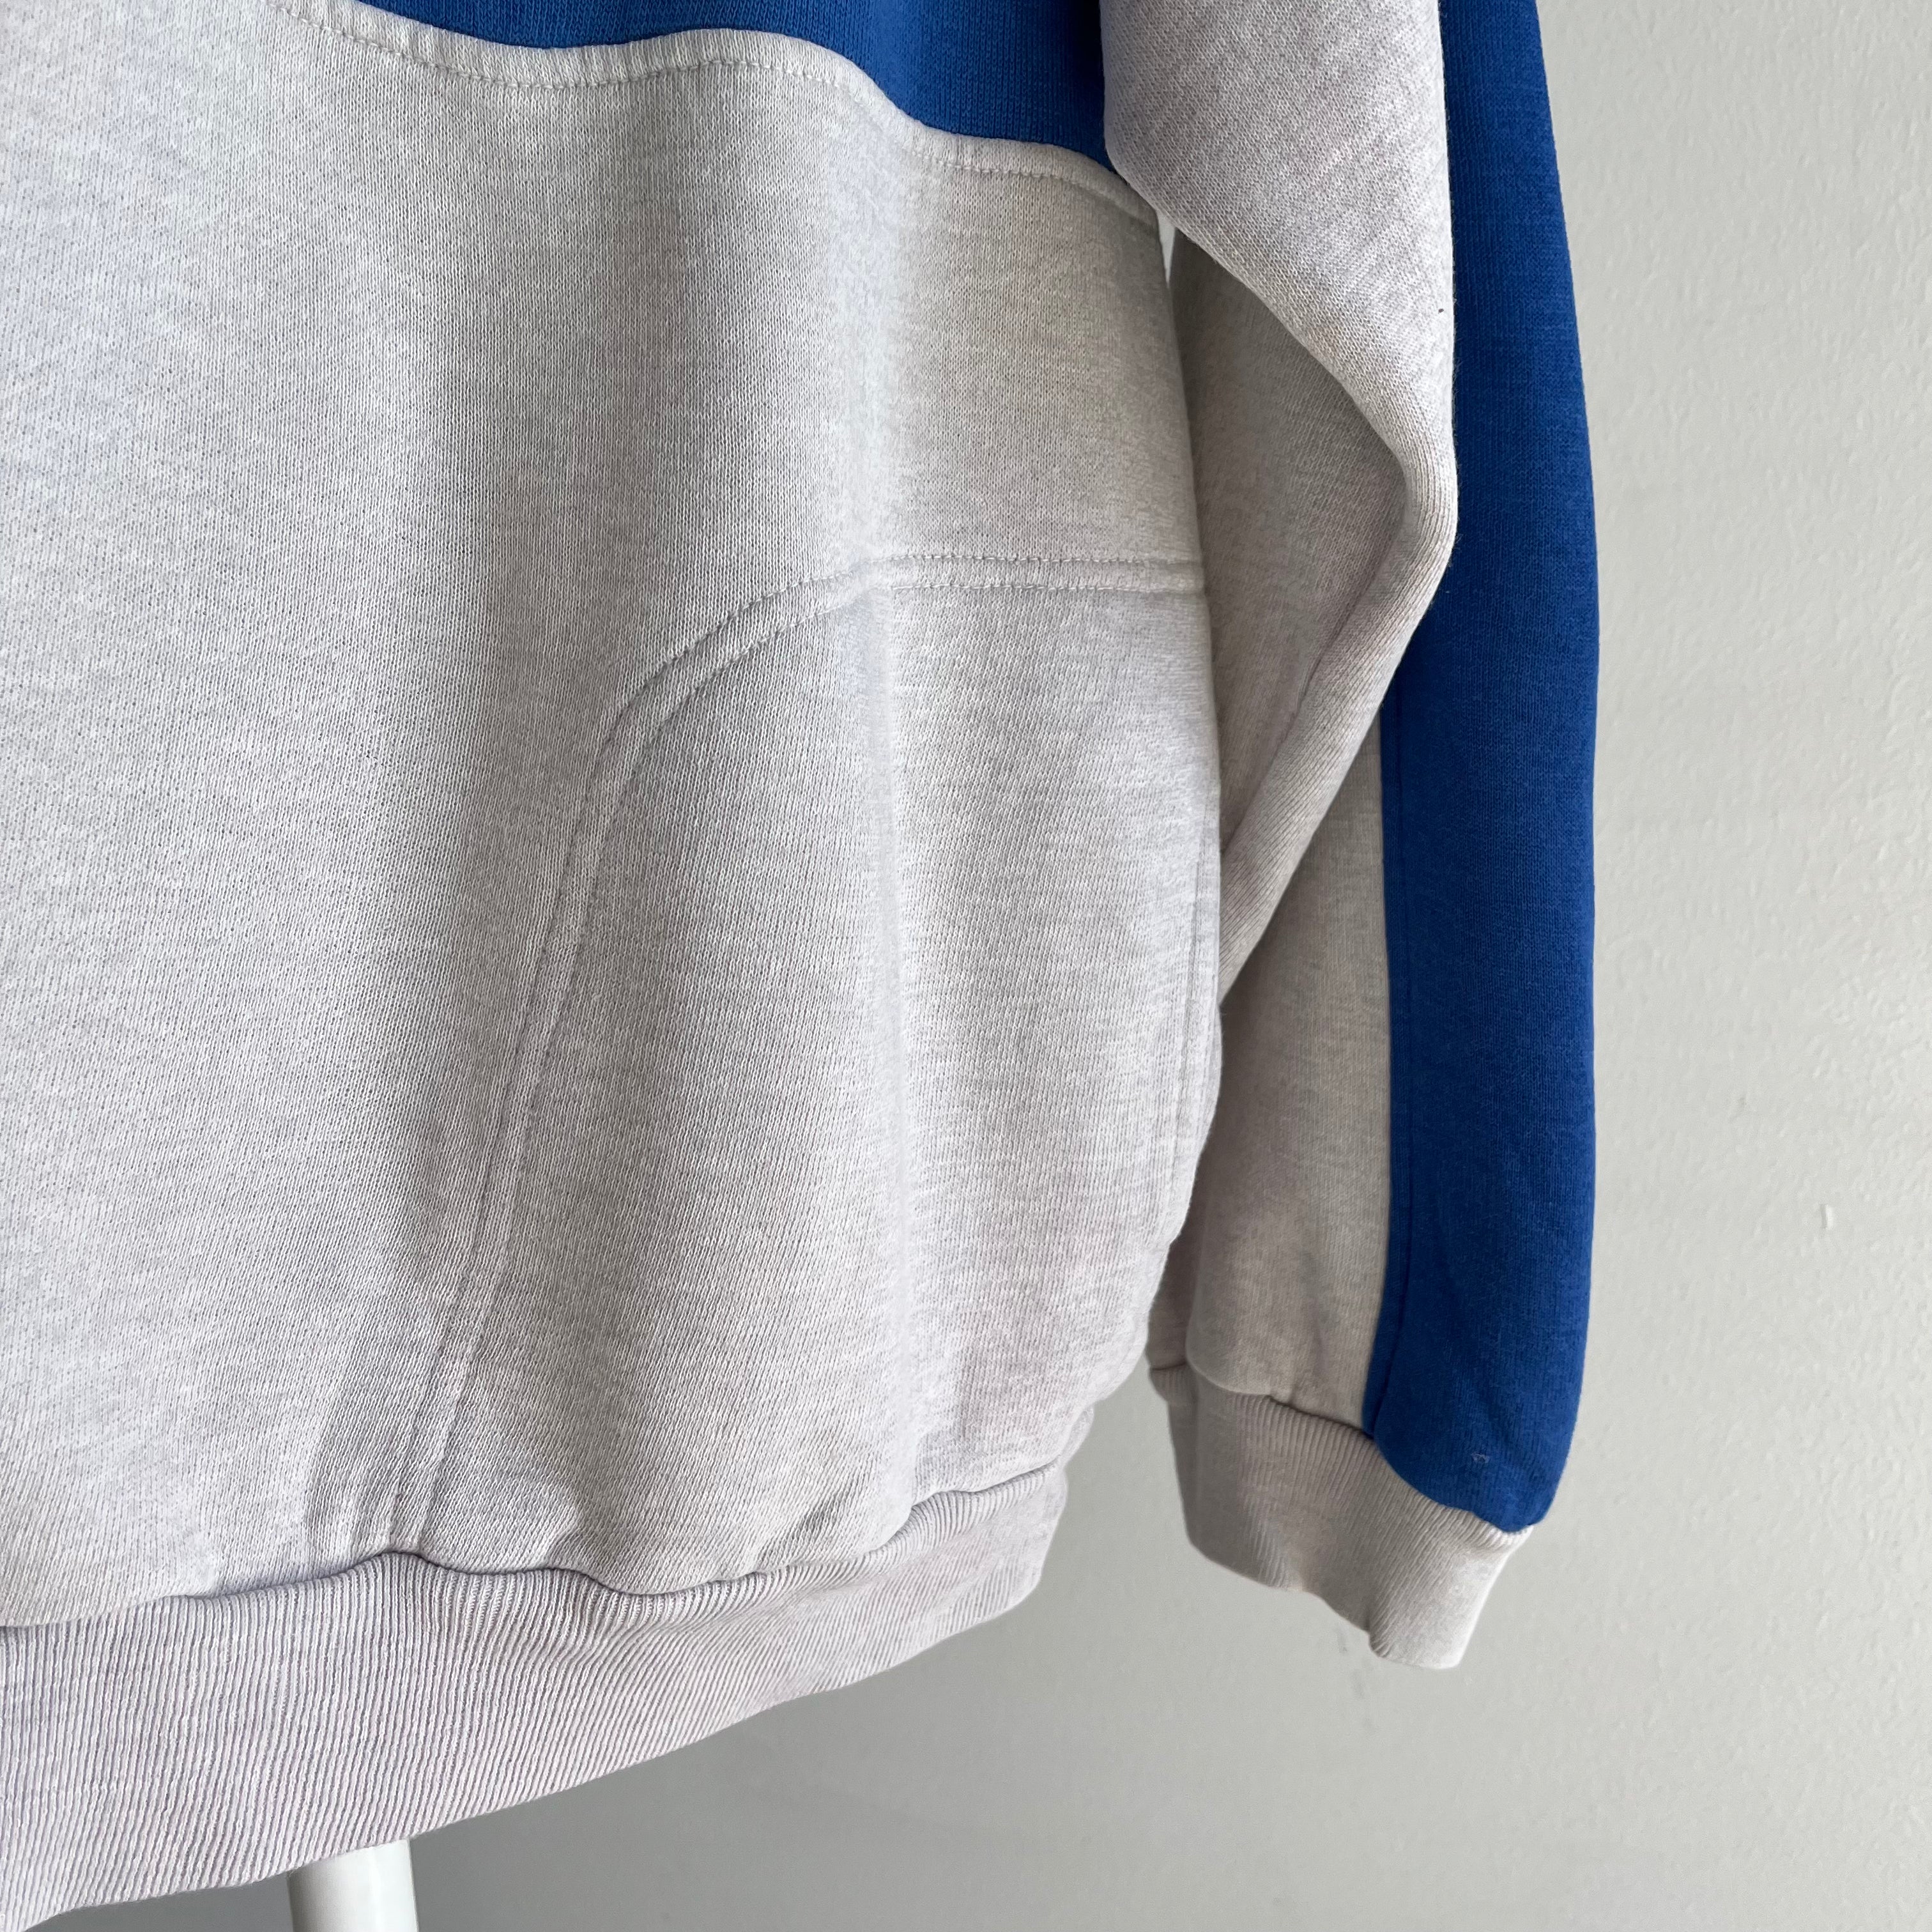 1980s Dunlop! Super Duper Soft and Slouchy Color Block Sweatshirt with Pockets!